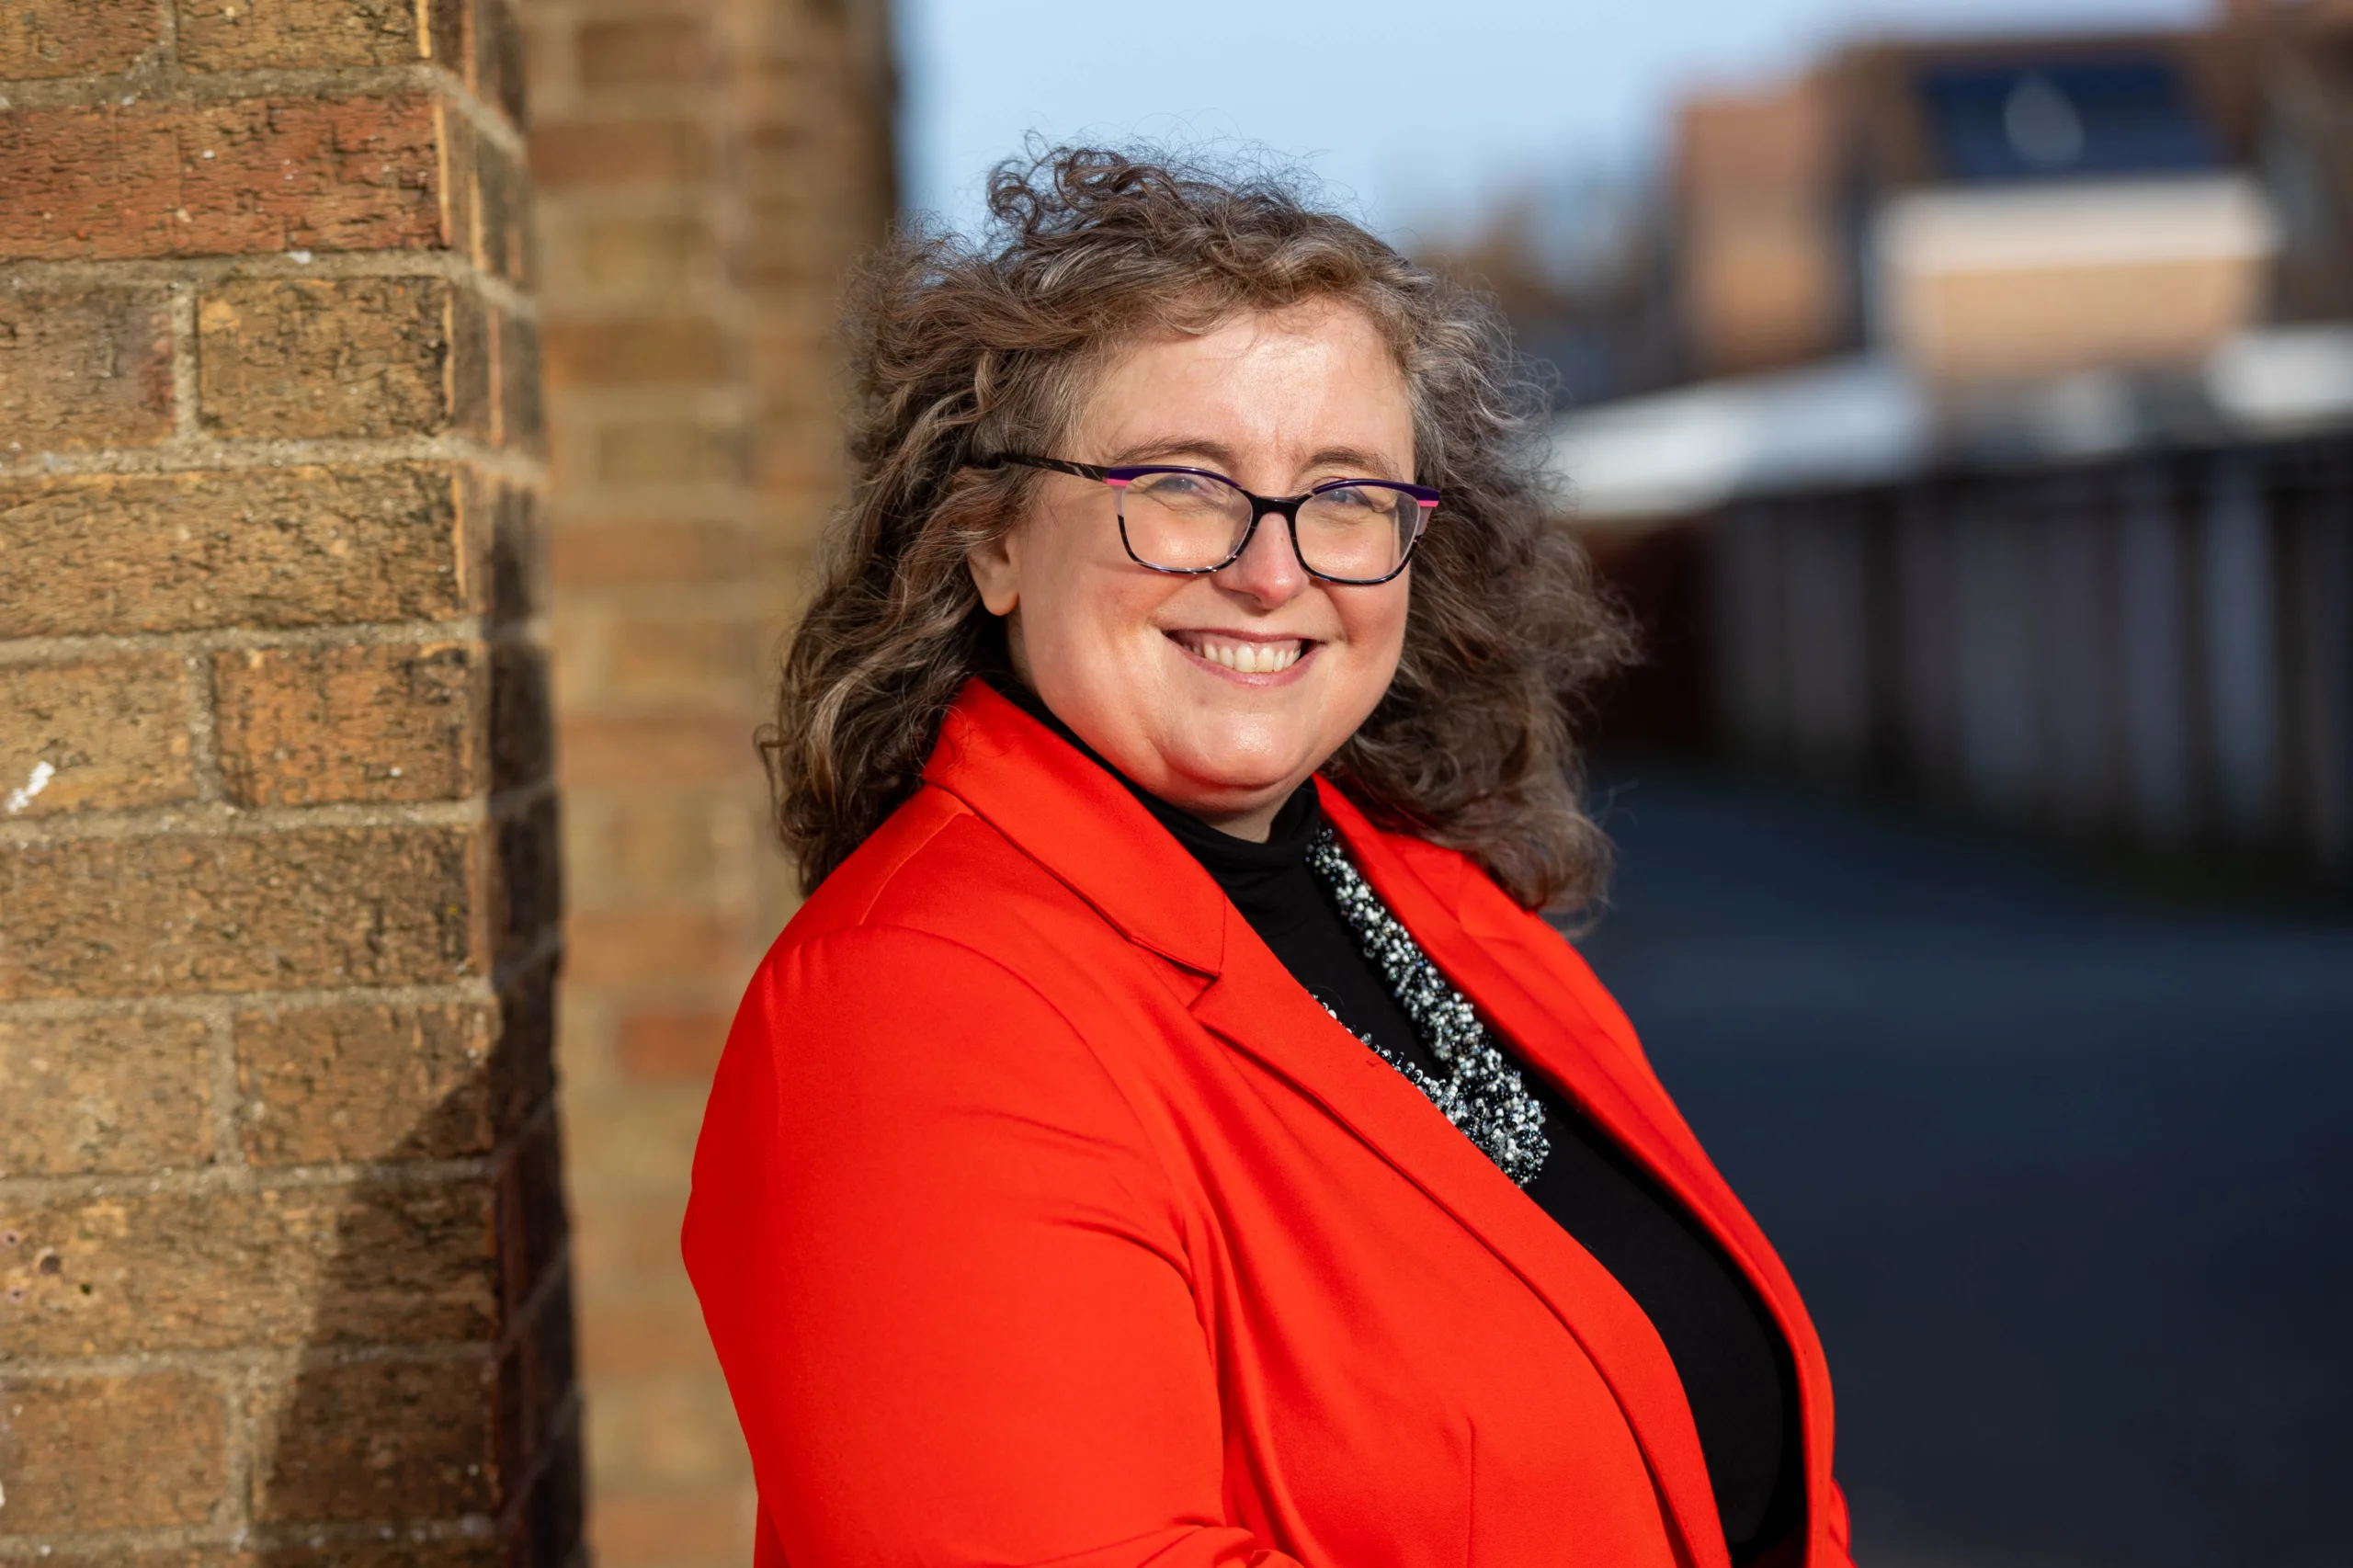 Cllr Anna Smith has been selected to stand as Labour’s police and crime commissioner candidate for Cambridgeshire and Peterborough.